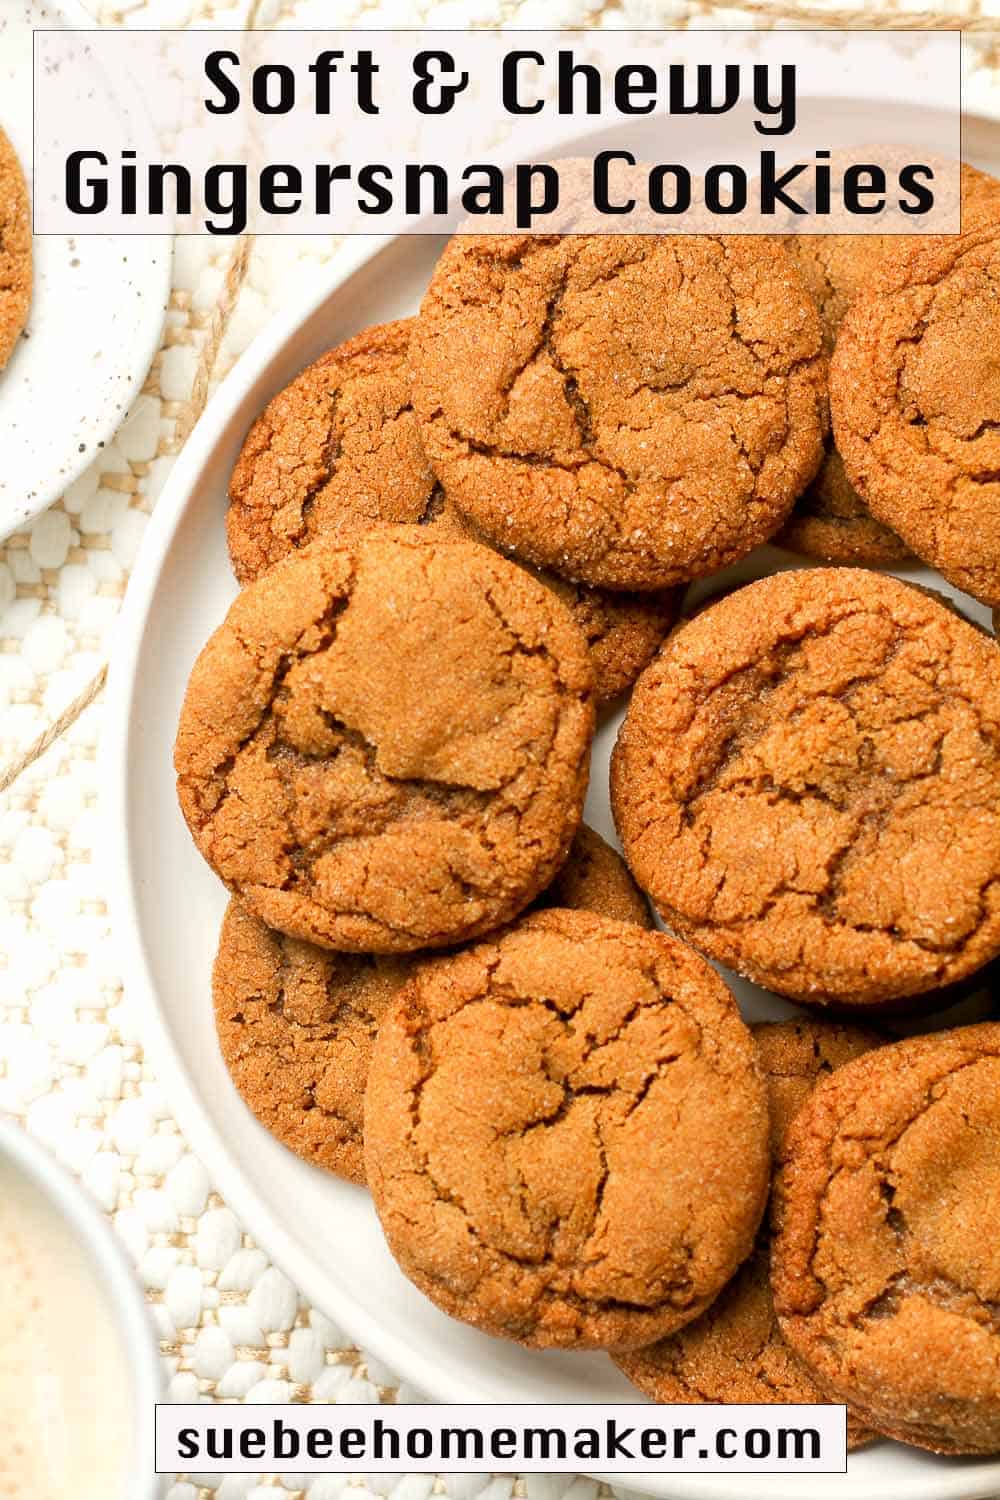 A plate of gingersnap cookies.